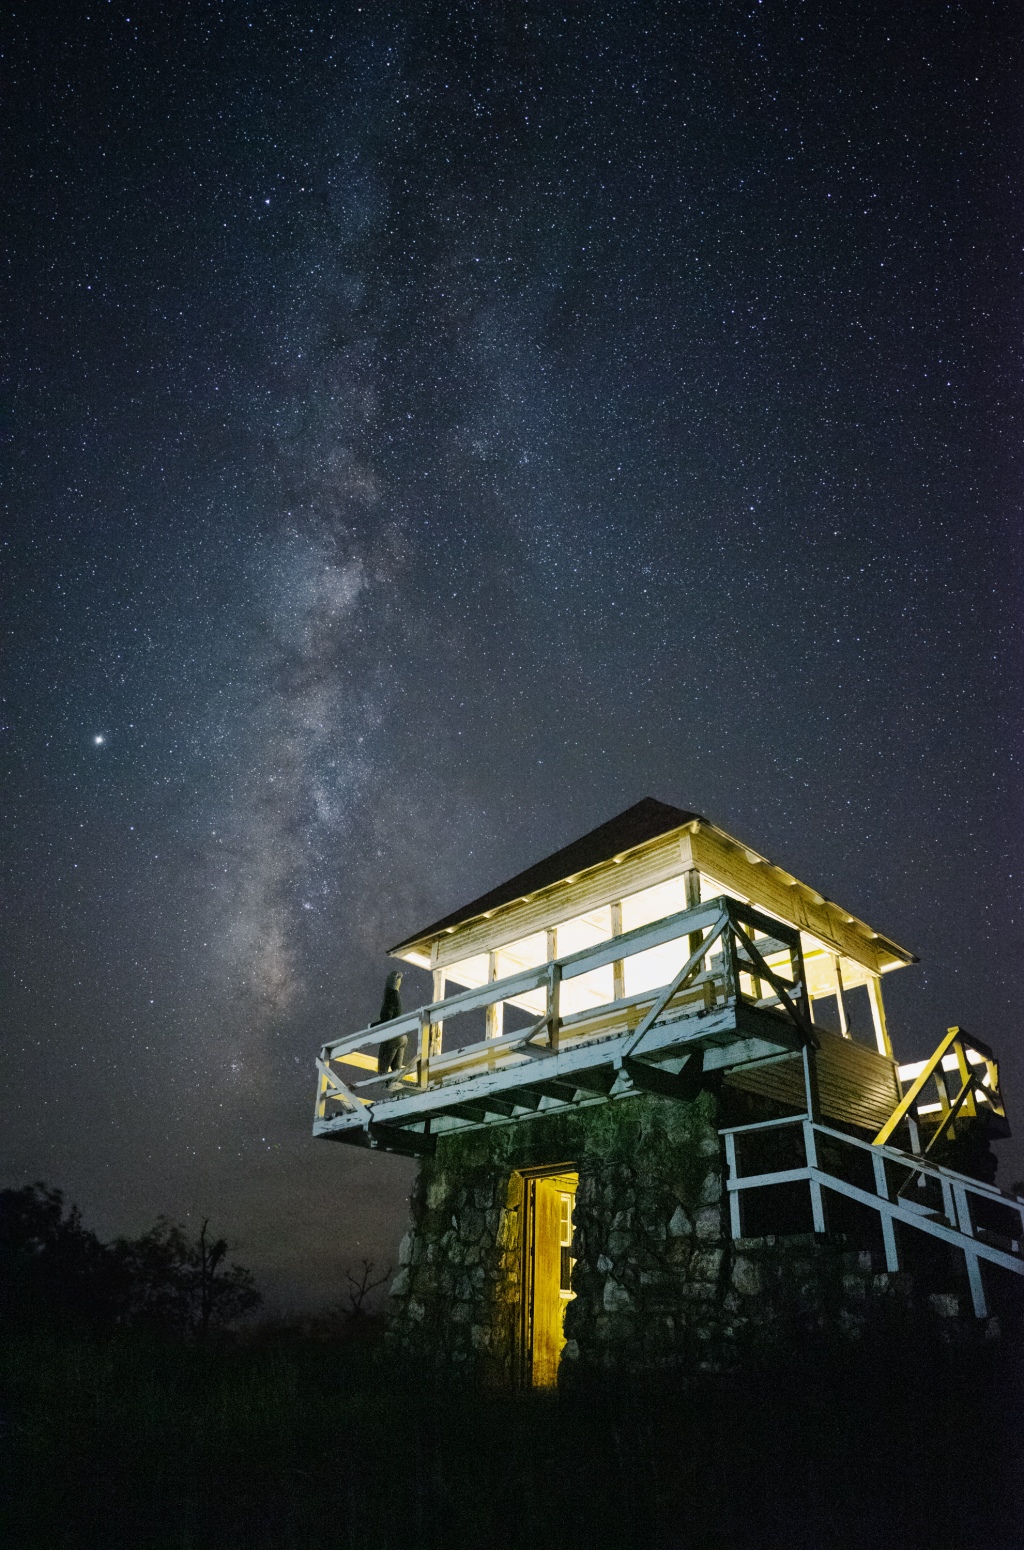 Girl looking at the Milky Way from an old fire tower